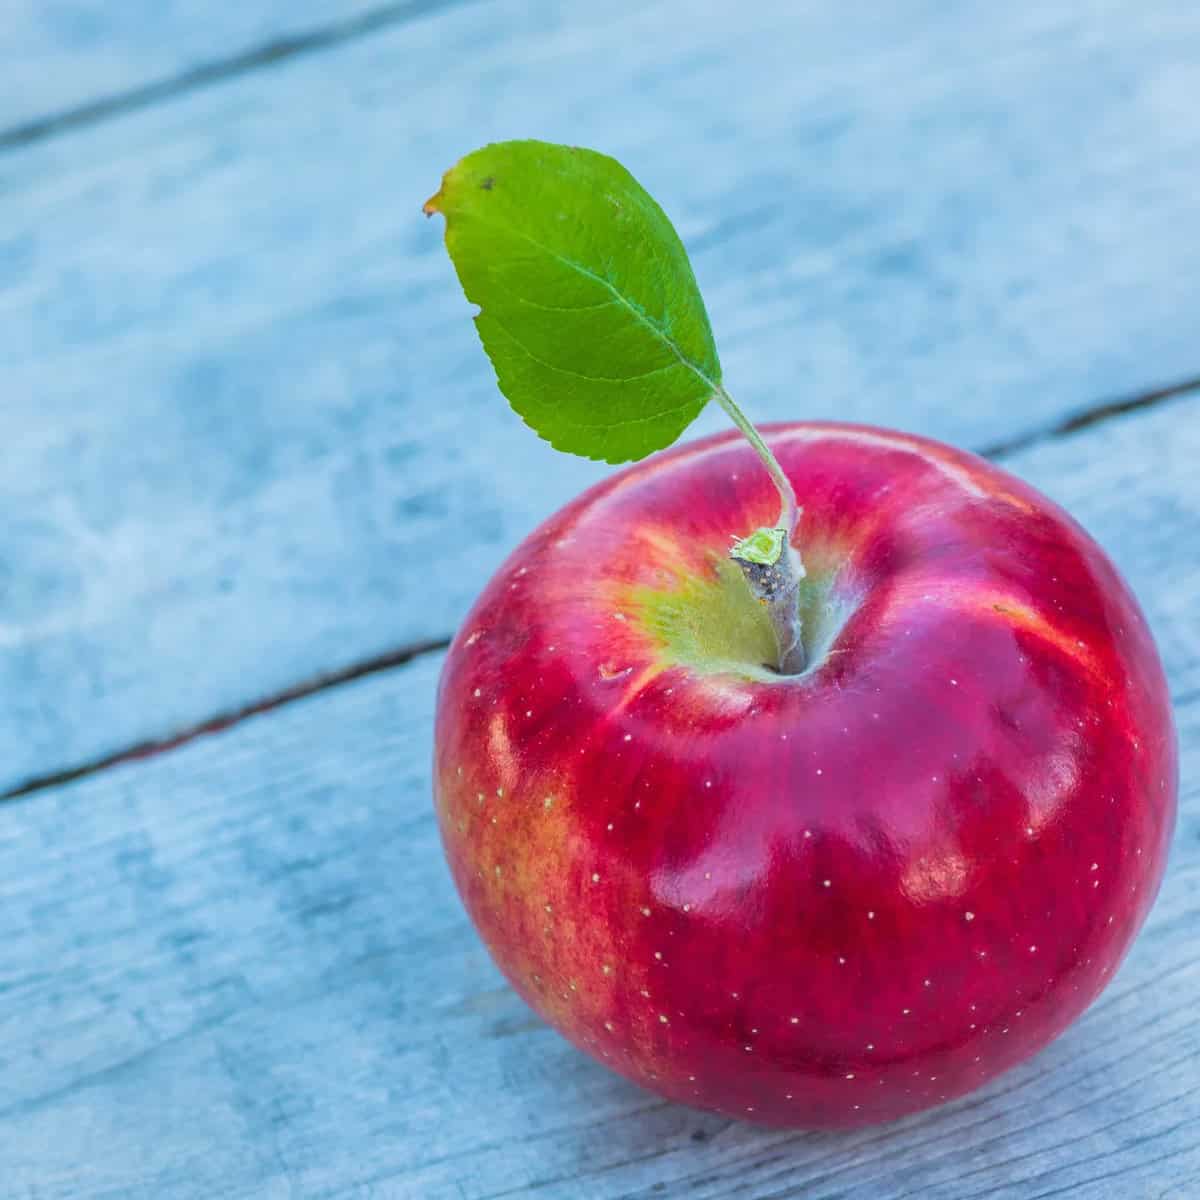 25 Different Apples You Should Know – Cortland